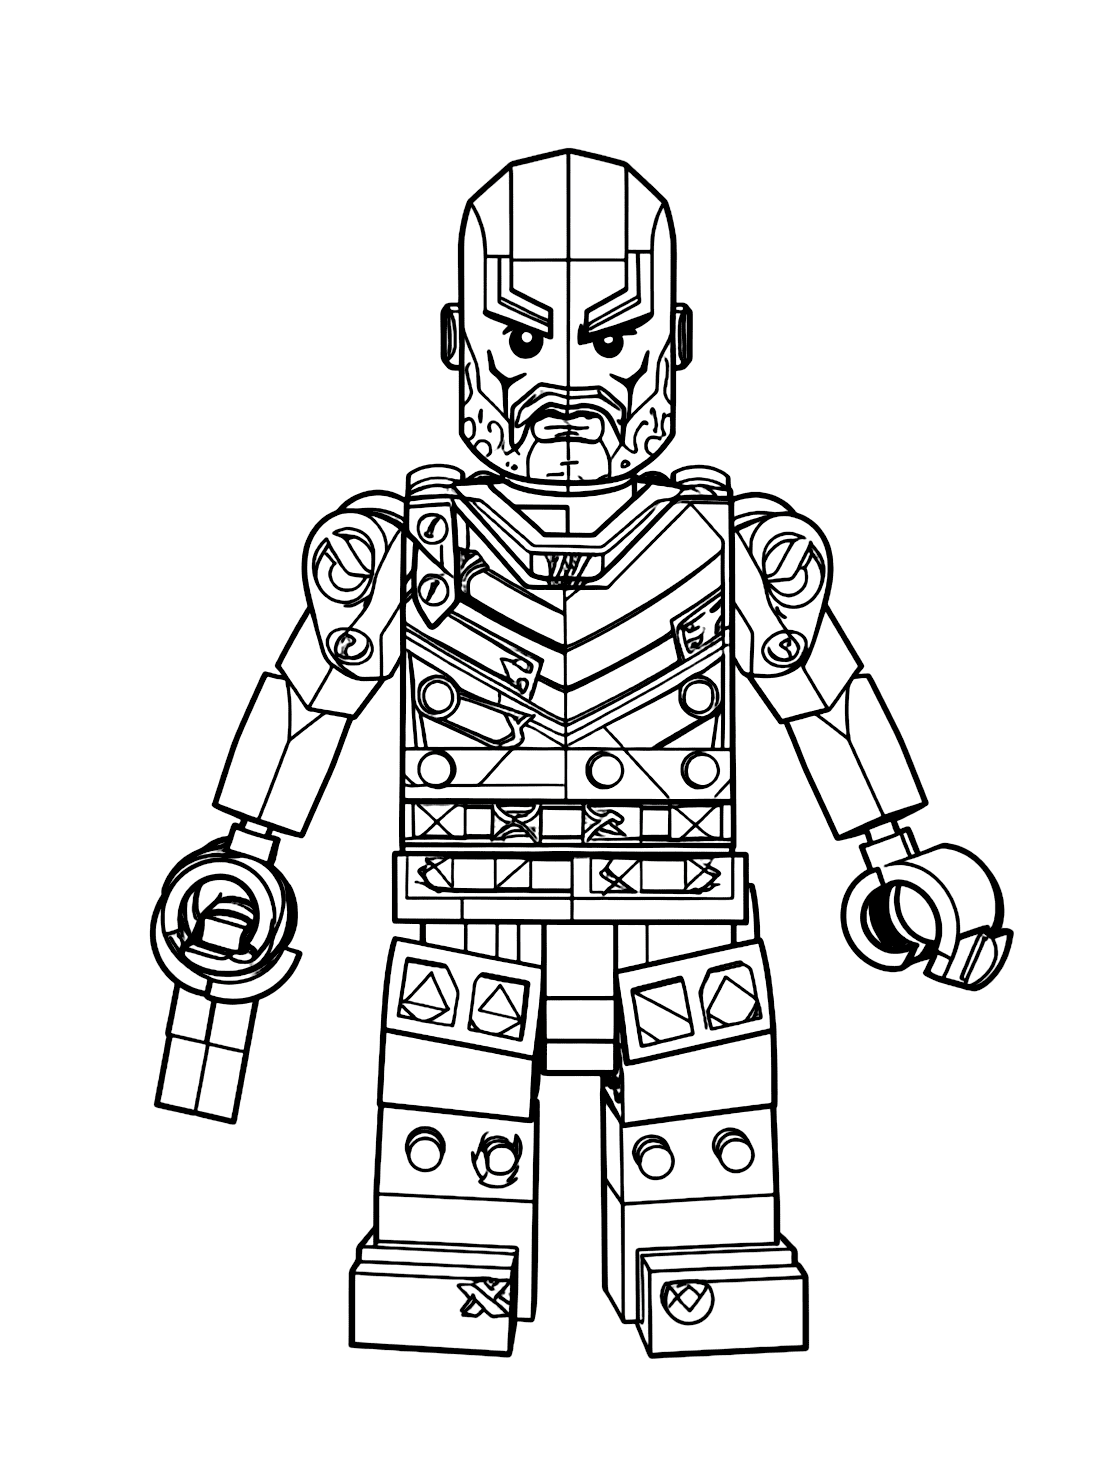 Kratos Coloring Pages